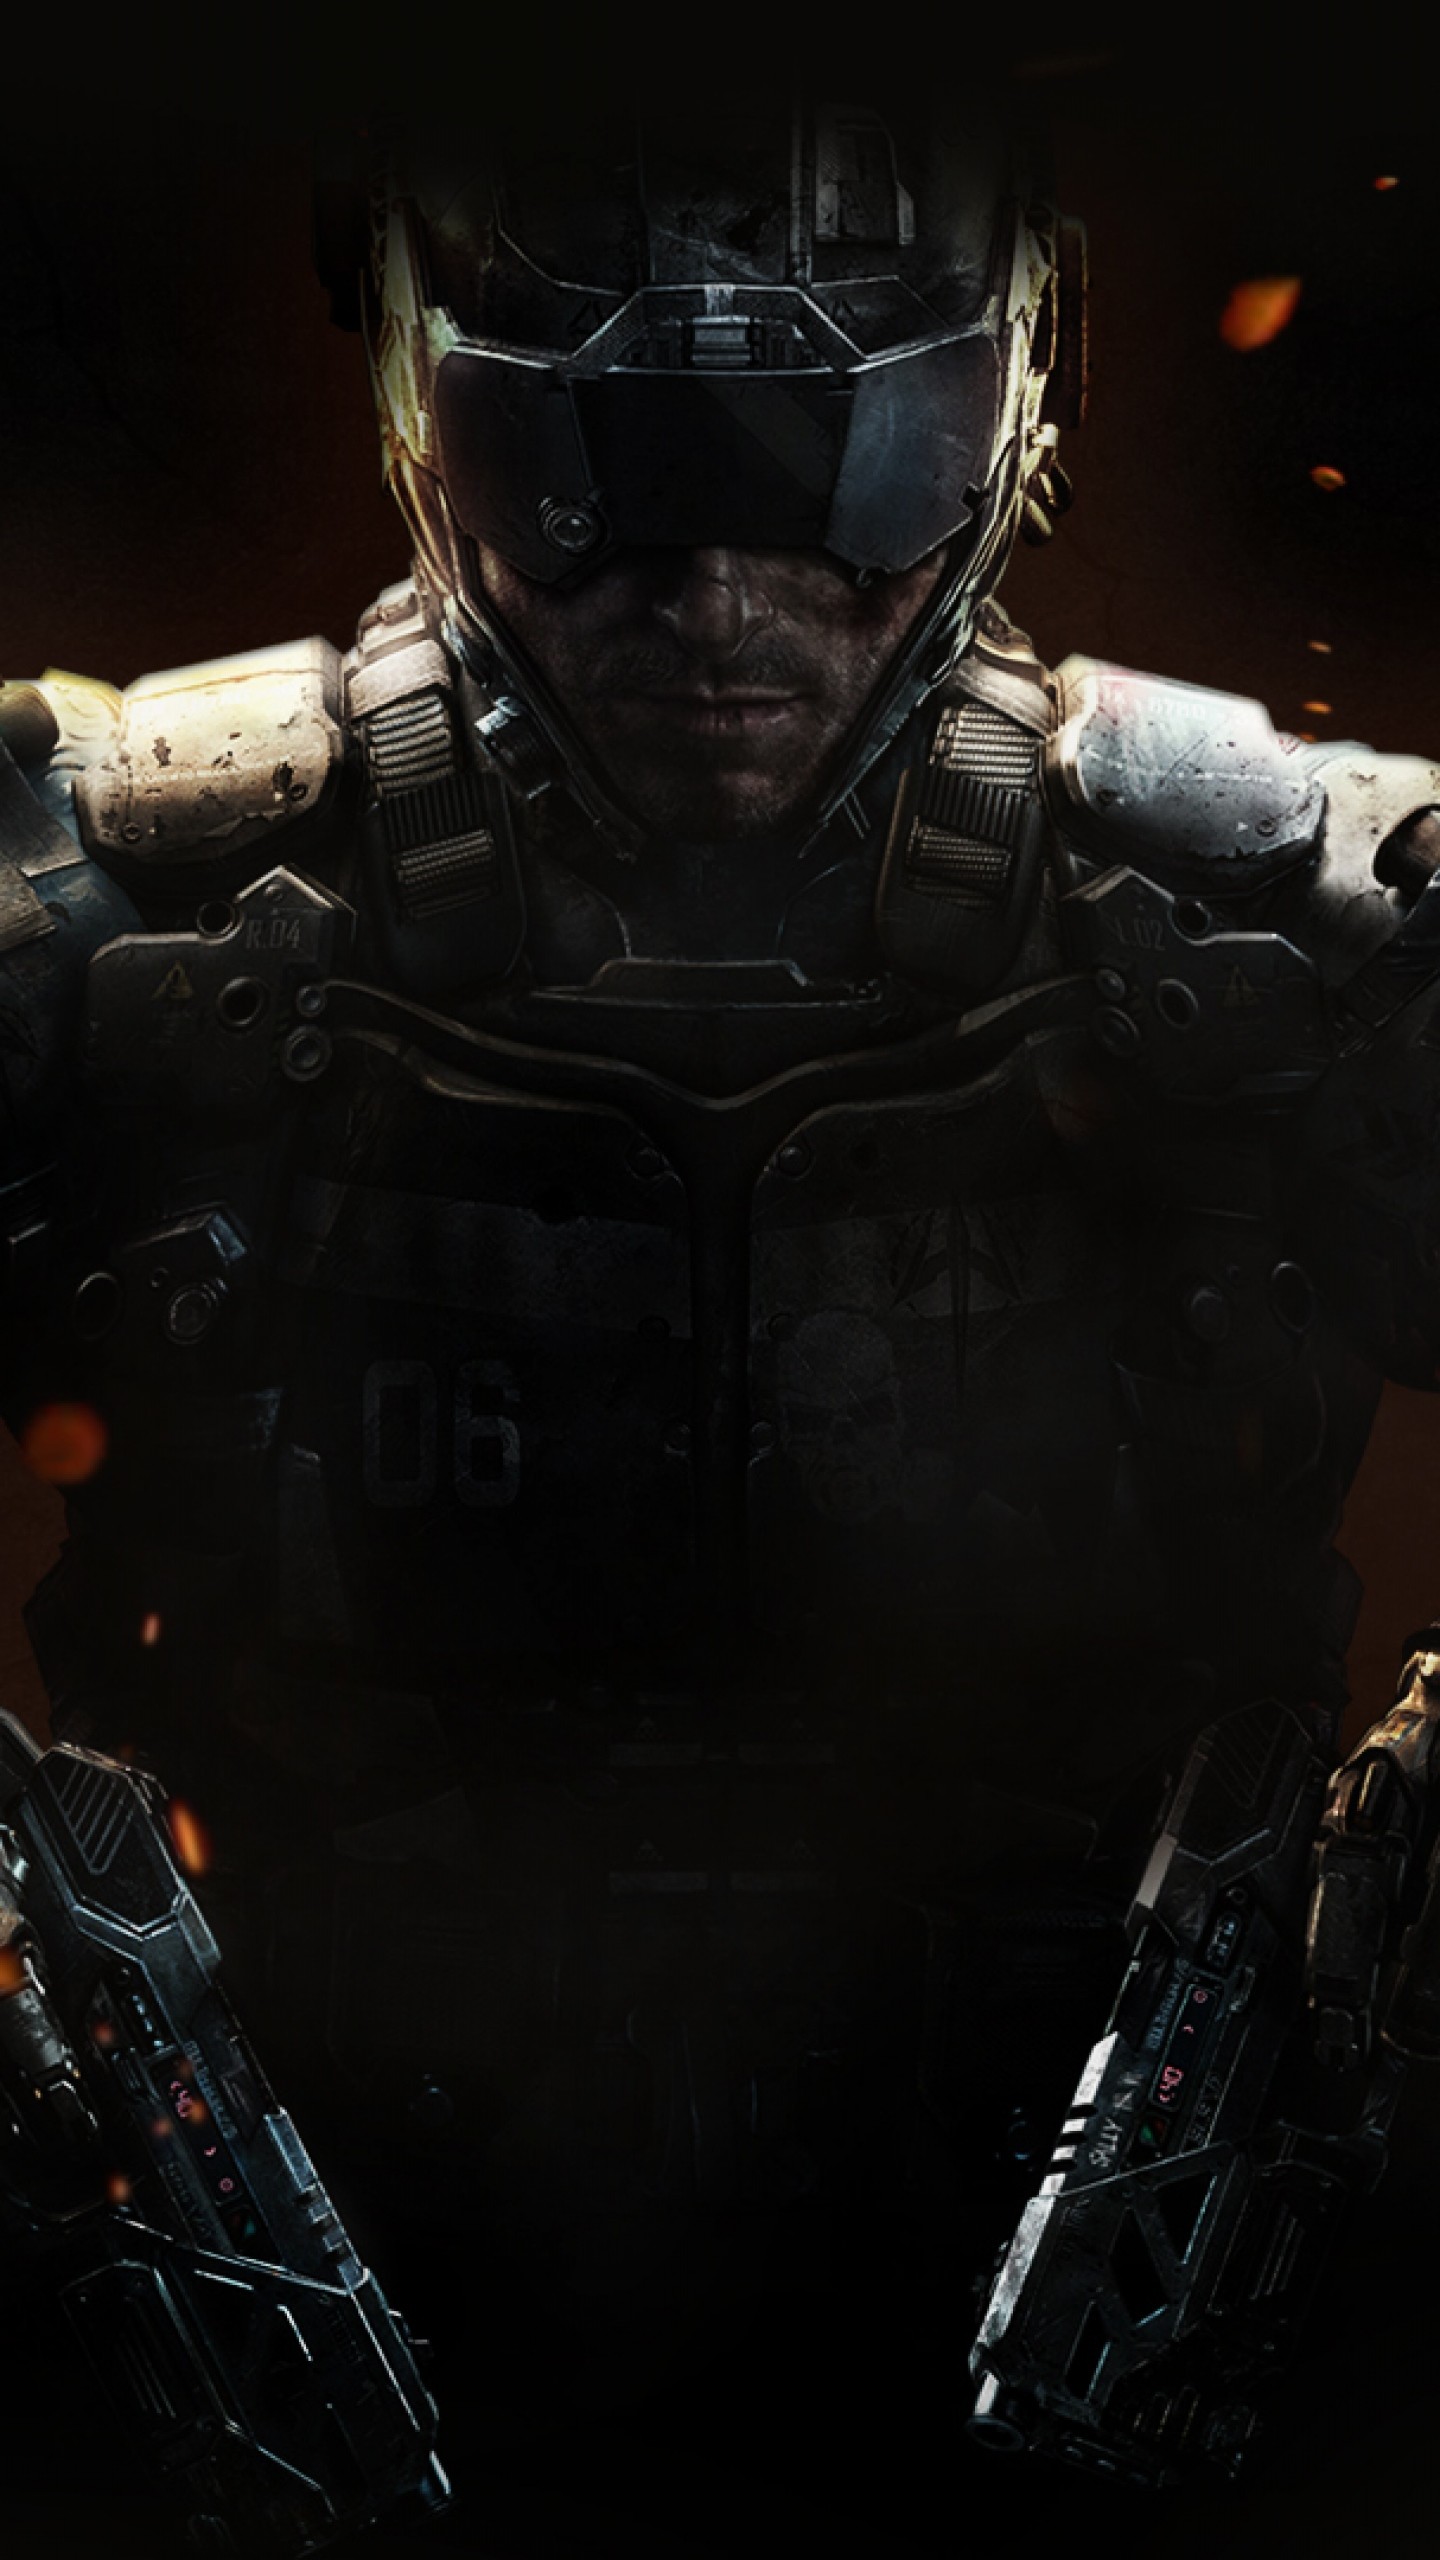 Preview Wallpaper Call Of Duty, Black Ops 3, Weapons, - Black Ops 3 -  1440x2560 Wallpaper 